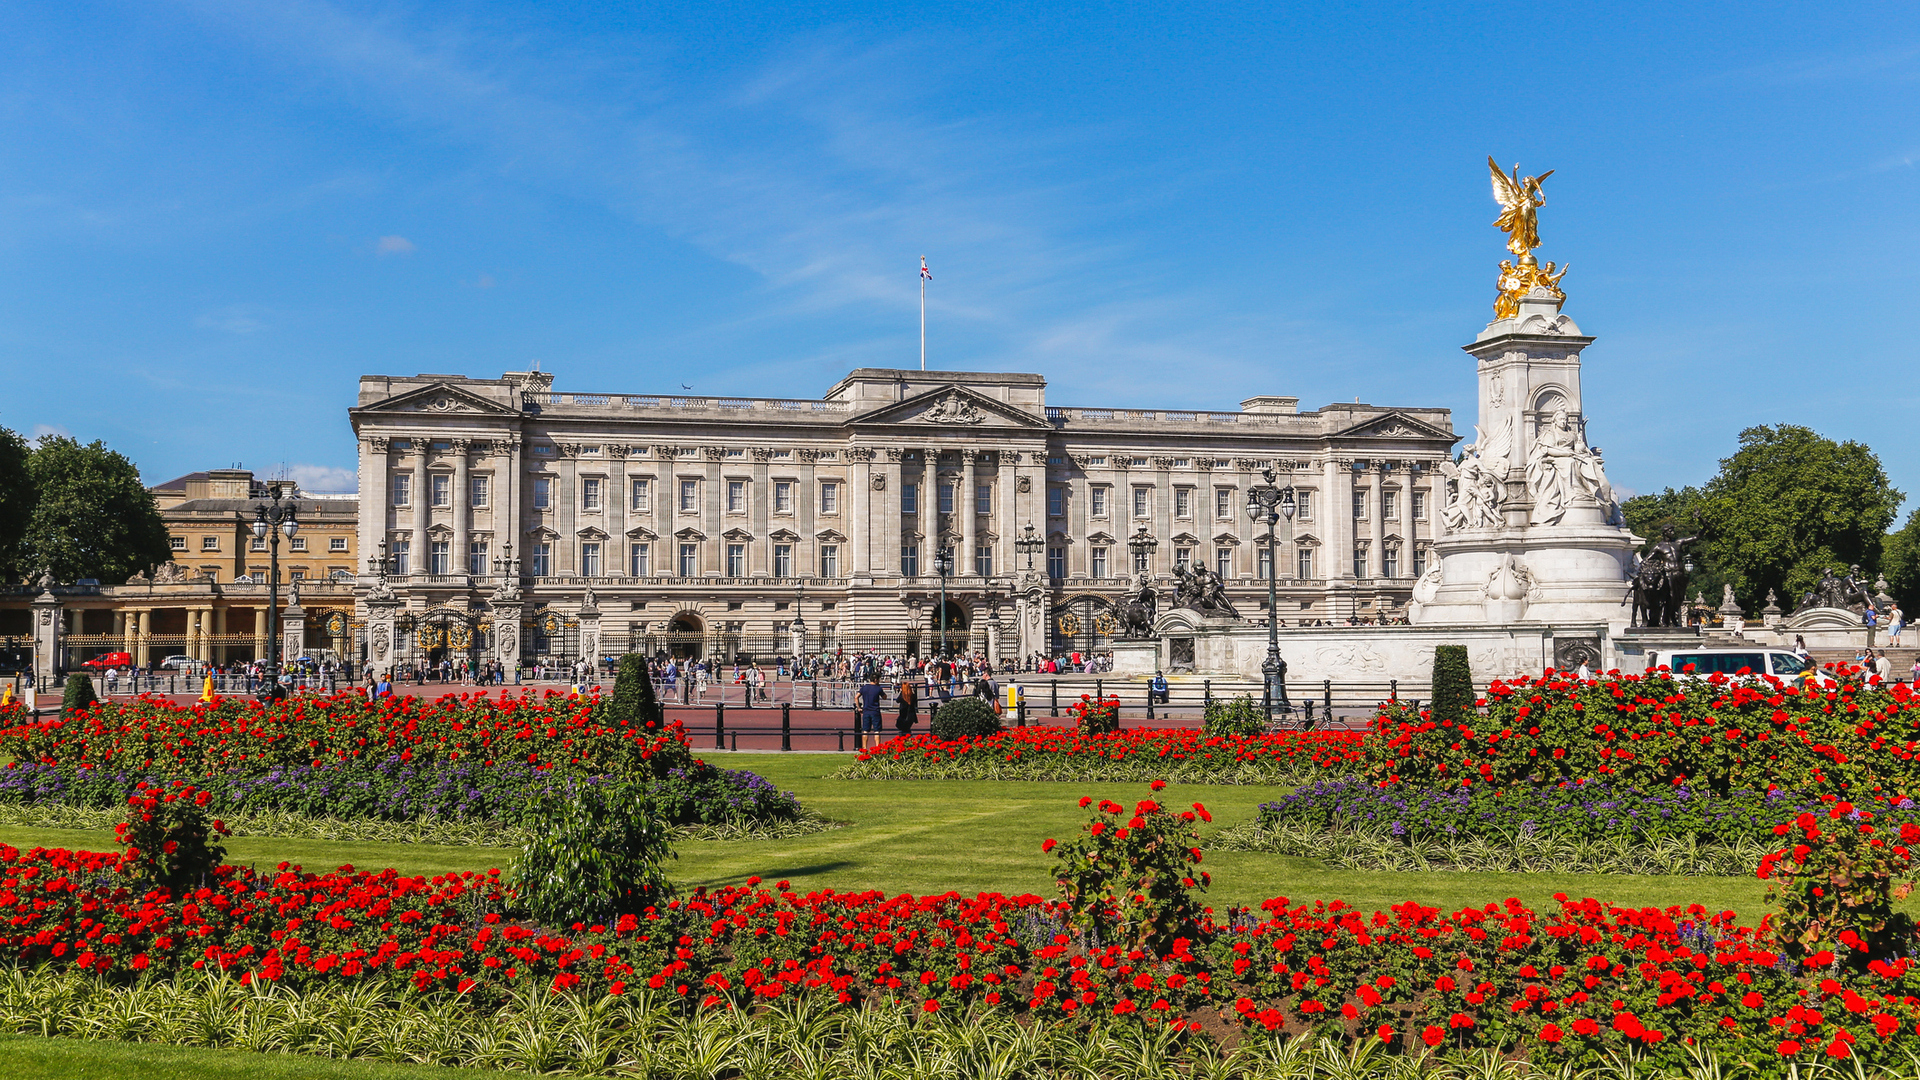 <p>If you're wondering how the British royal family spends its money, wonder no more -- it's actually all documented.</p> <p>According to the royal family's official 2021 Sovereign Grant Summary, the largest royal expense for the year was property maintenance, which includes the ongoing, long-term reservicing of Buckingham Palace. Property expenses totaled £49.5 million ($56.5 million) for the year. The next largest expense was staff payroll, which cost £24.1 million ($27.5 million). King Charles already has signaled he intends to cut staffing.</p>